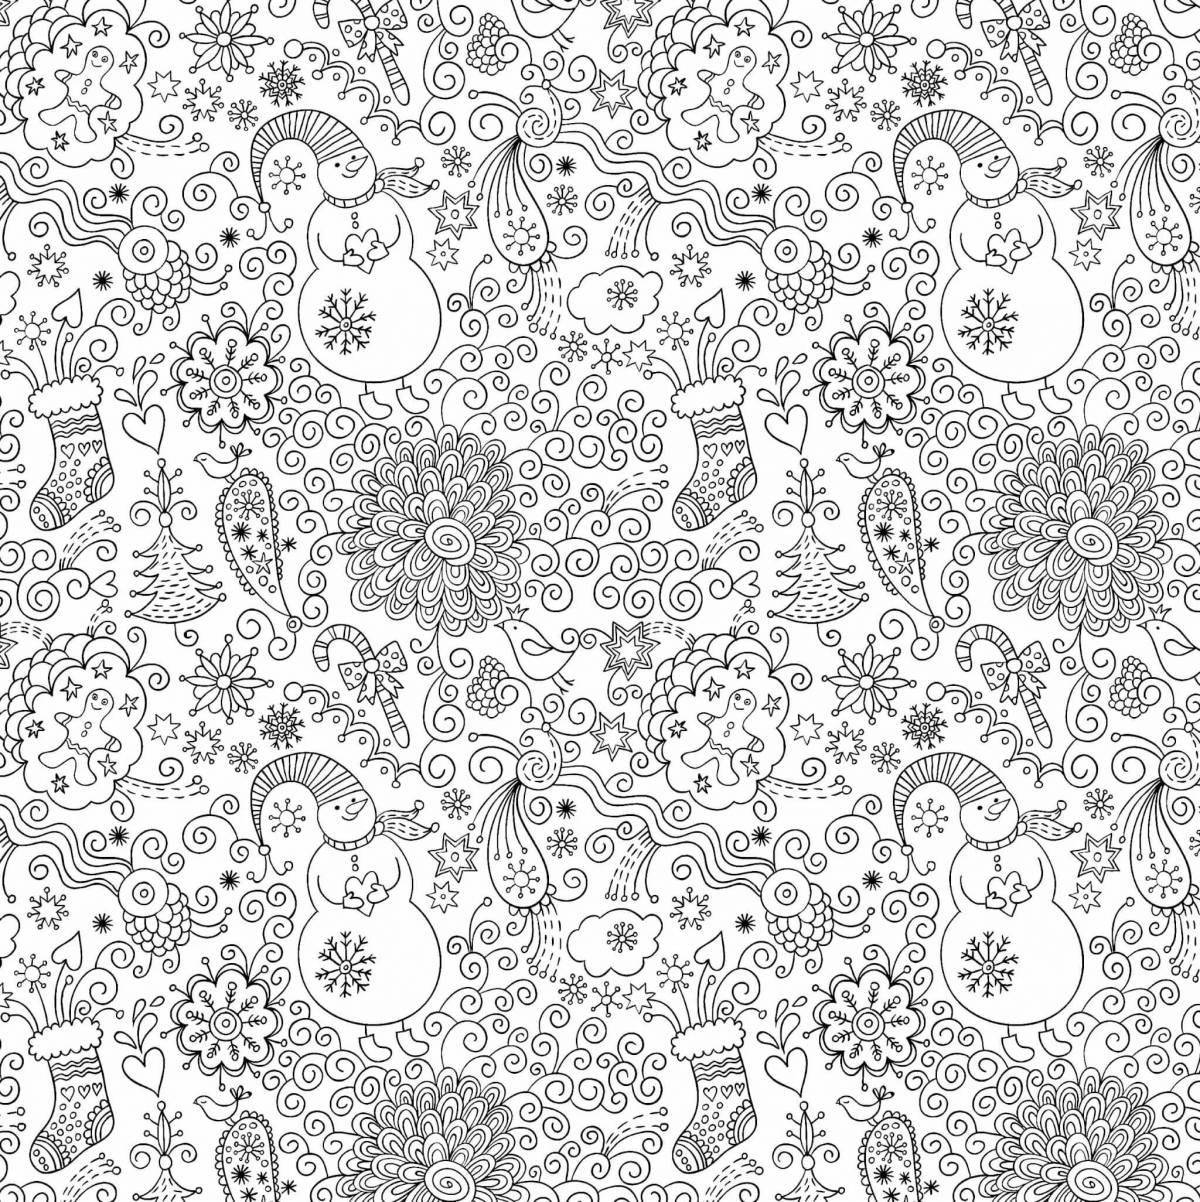 Calm coloring page background